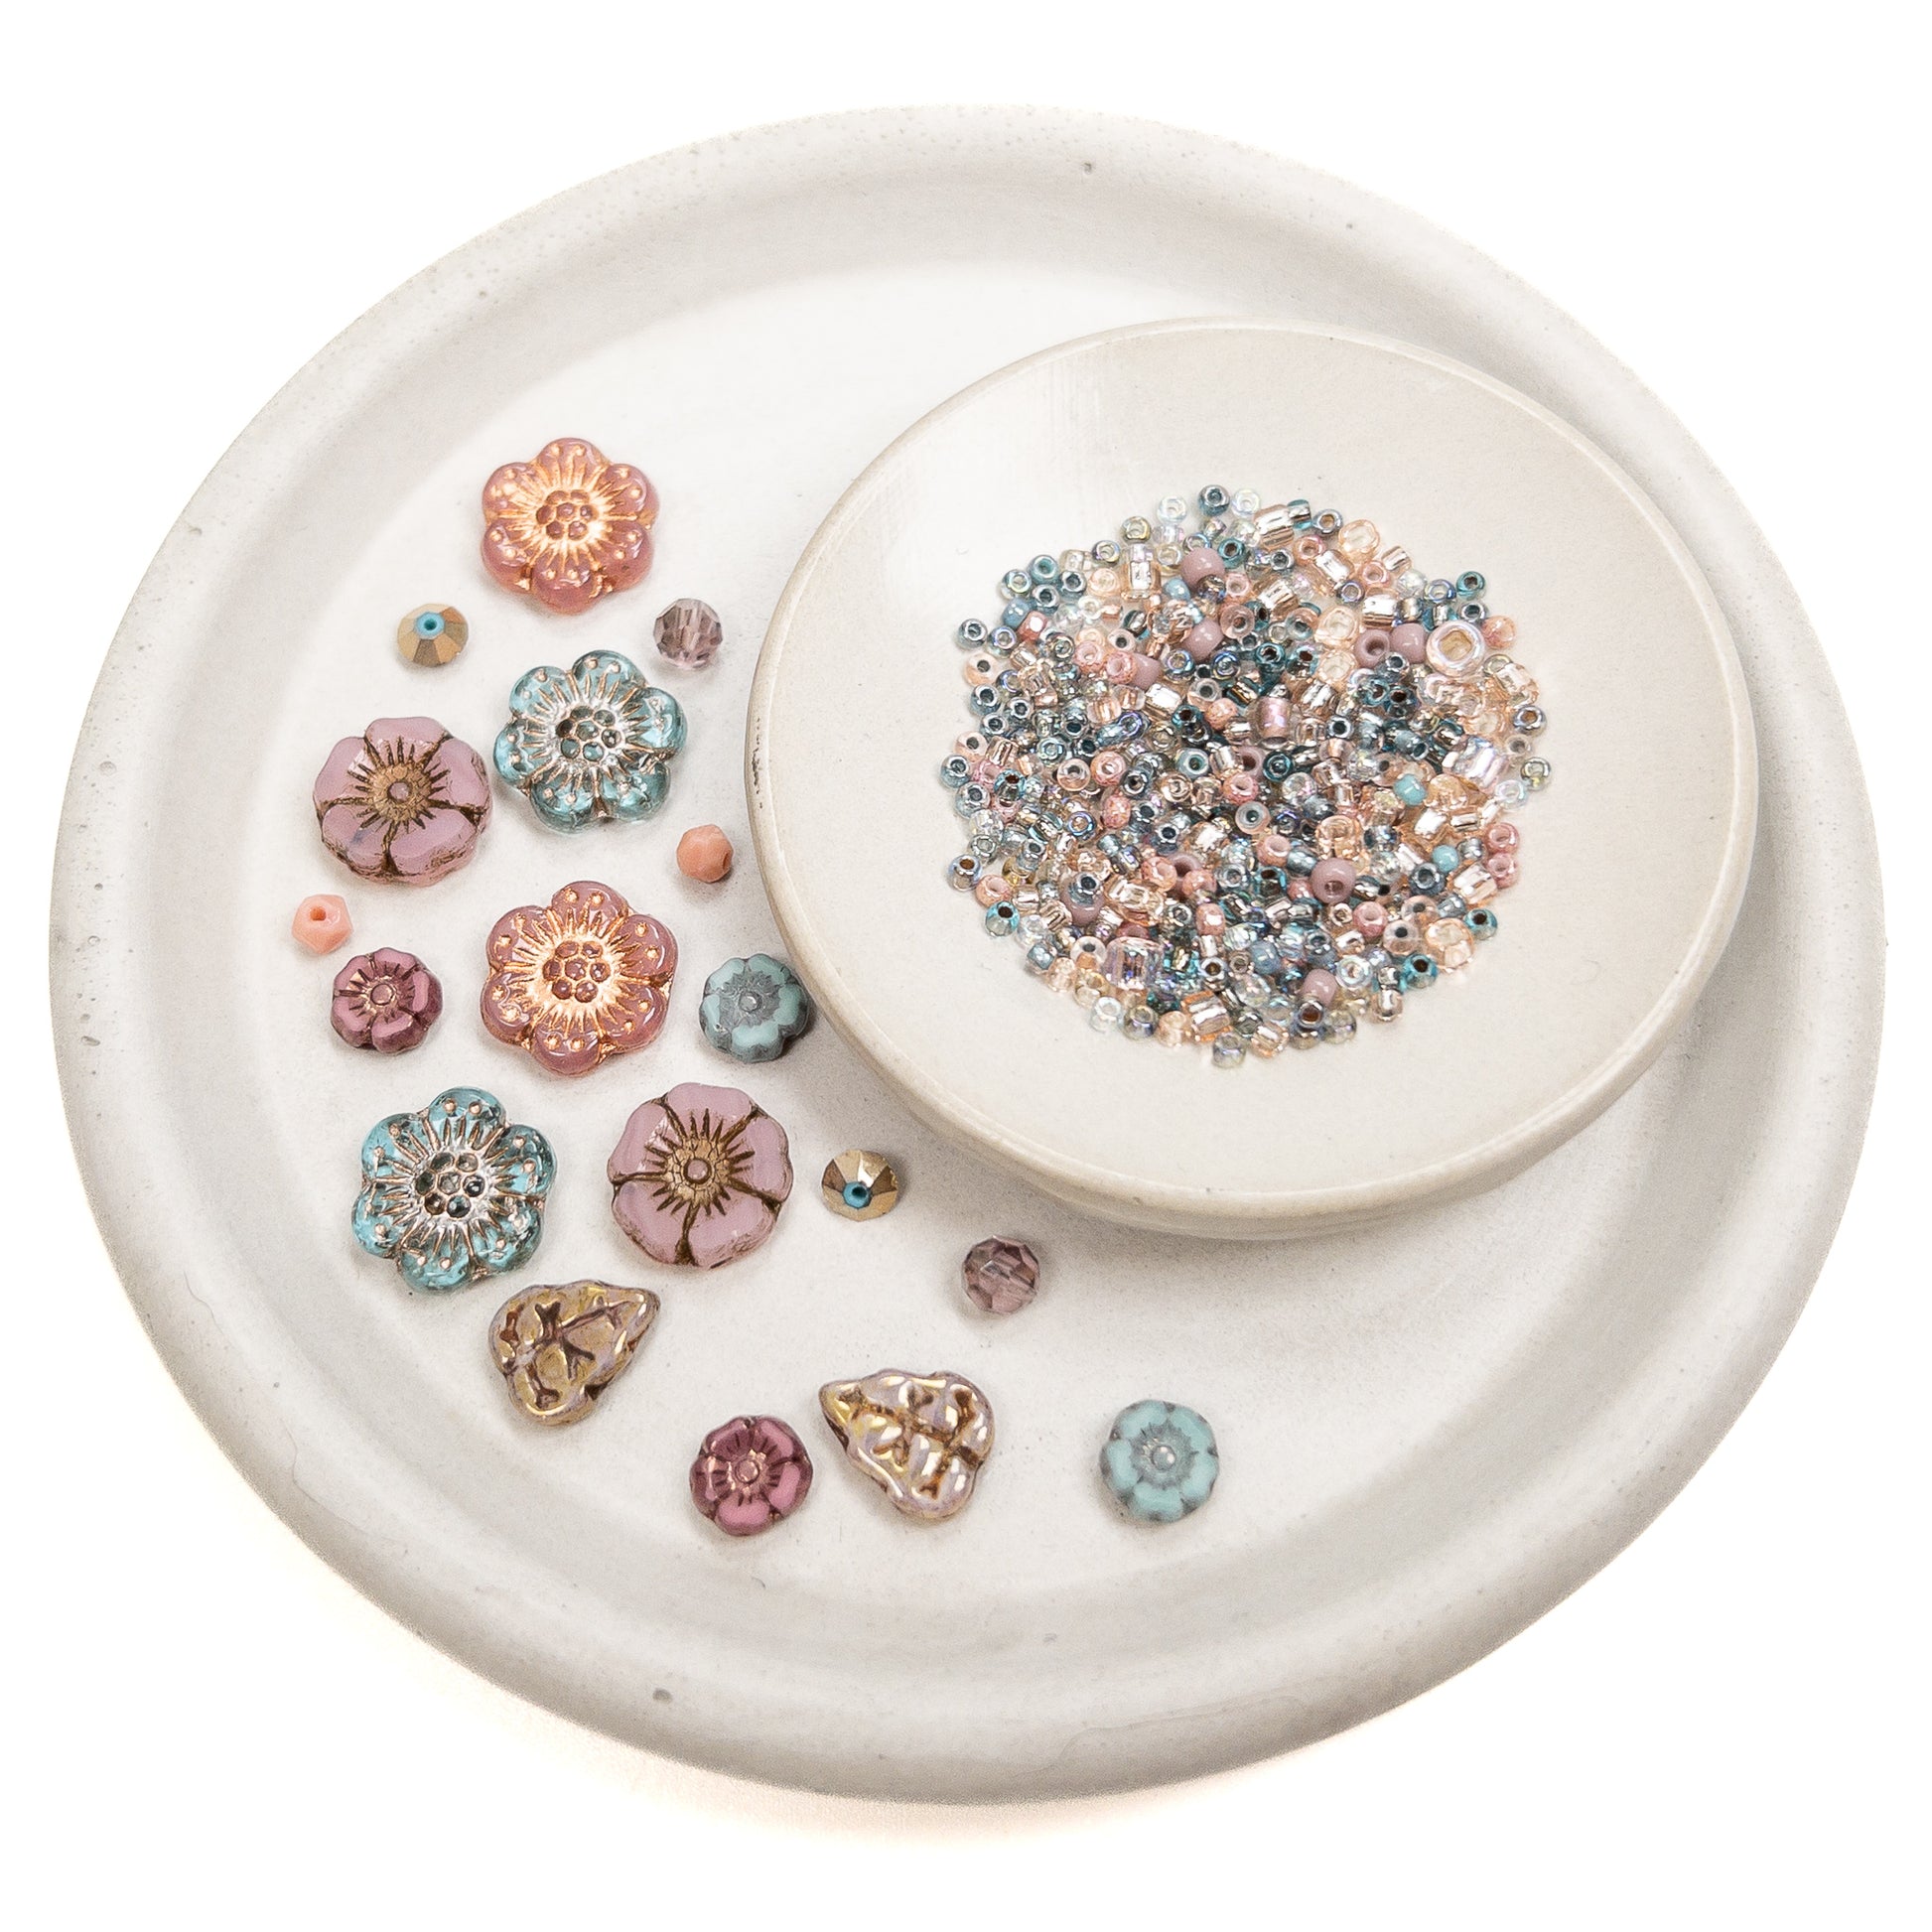 Bag of Blossoms Glass Bead Mix (6 Options Available)